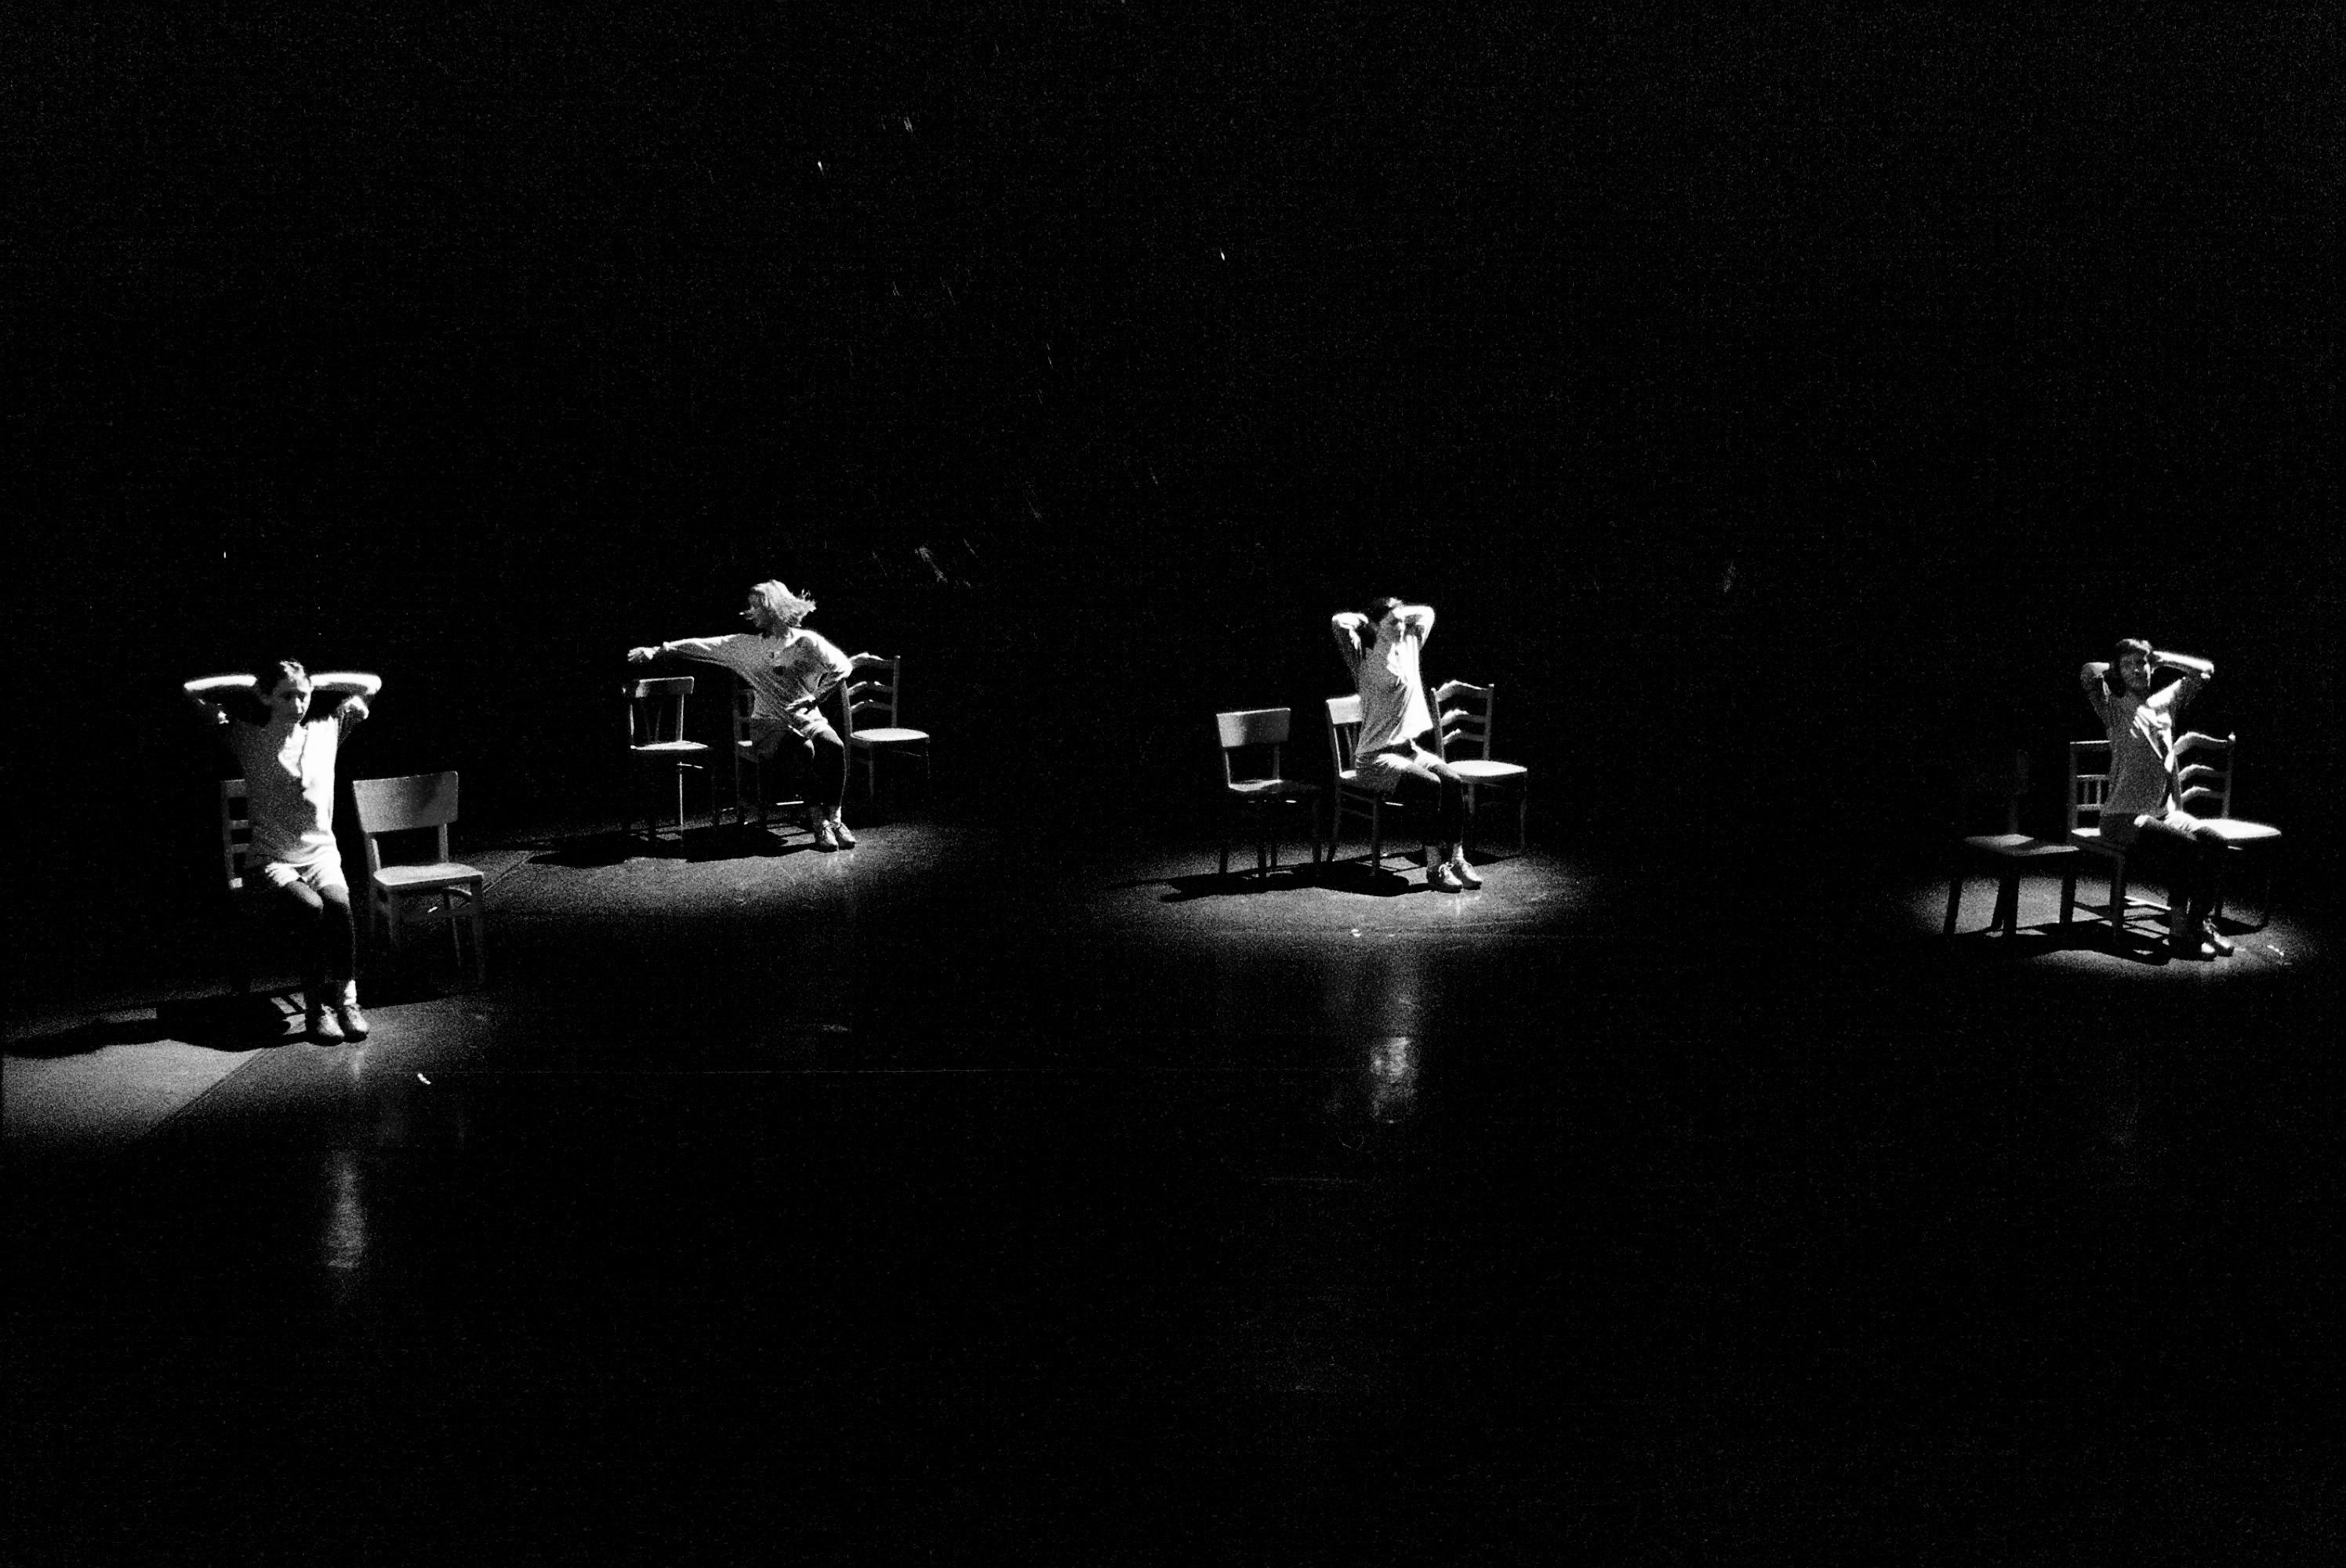 Black-and-white performance still of four women on a pitch-black stage, each one illuminated by a spotlight and dancing in a chair